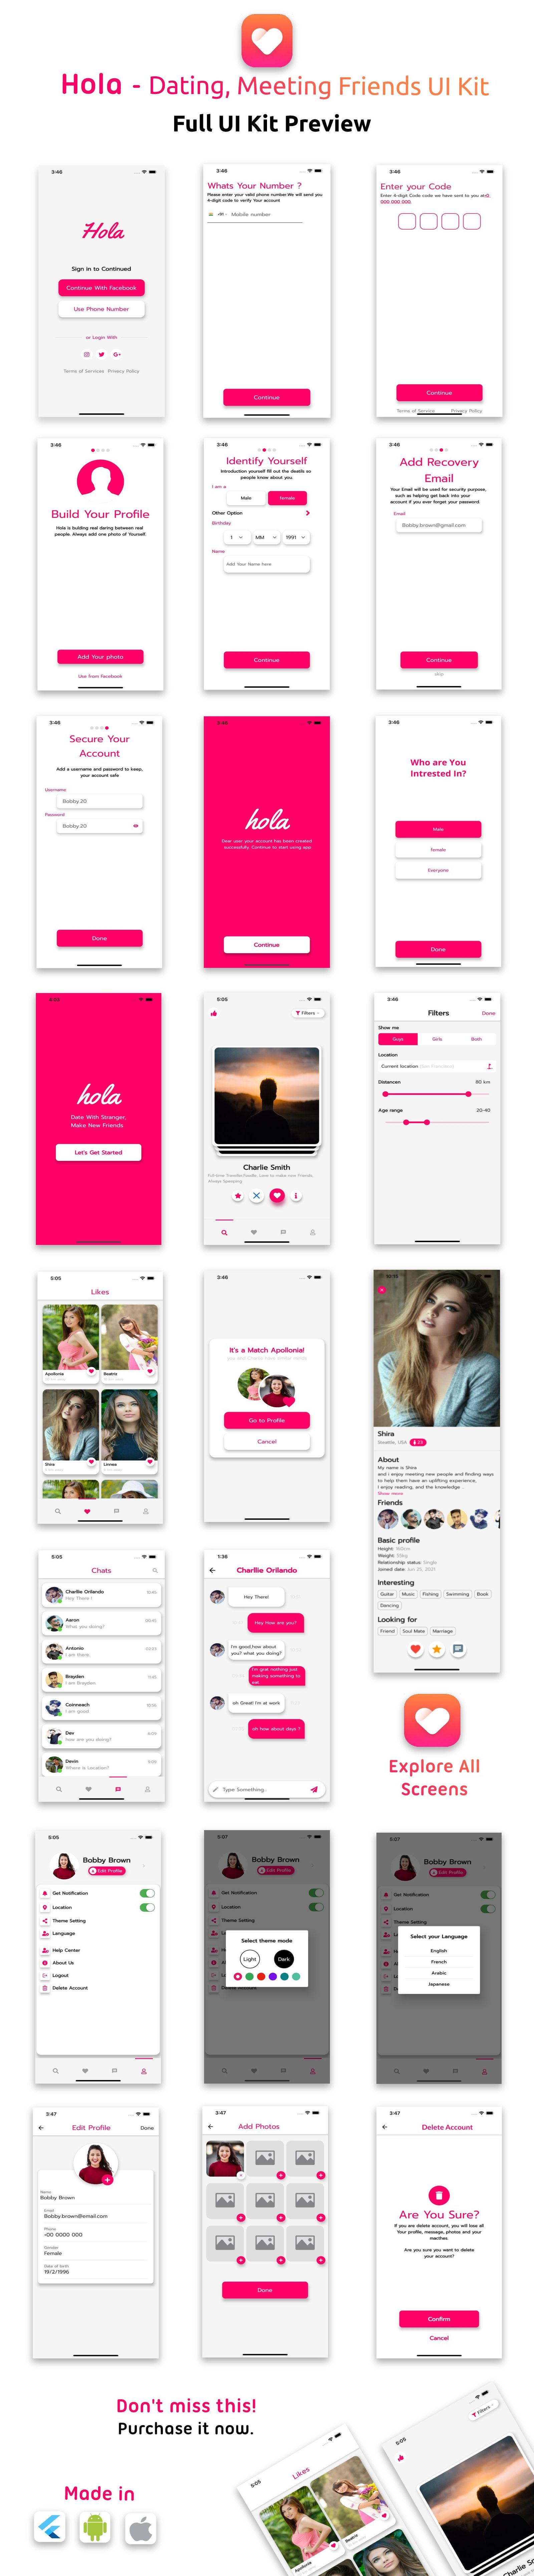 Hola Dating Android App Template + iOS App Template | Flutter | Boys-Girls Dating App - 3